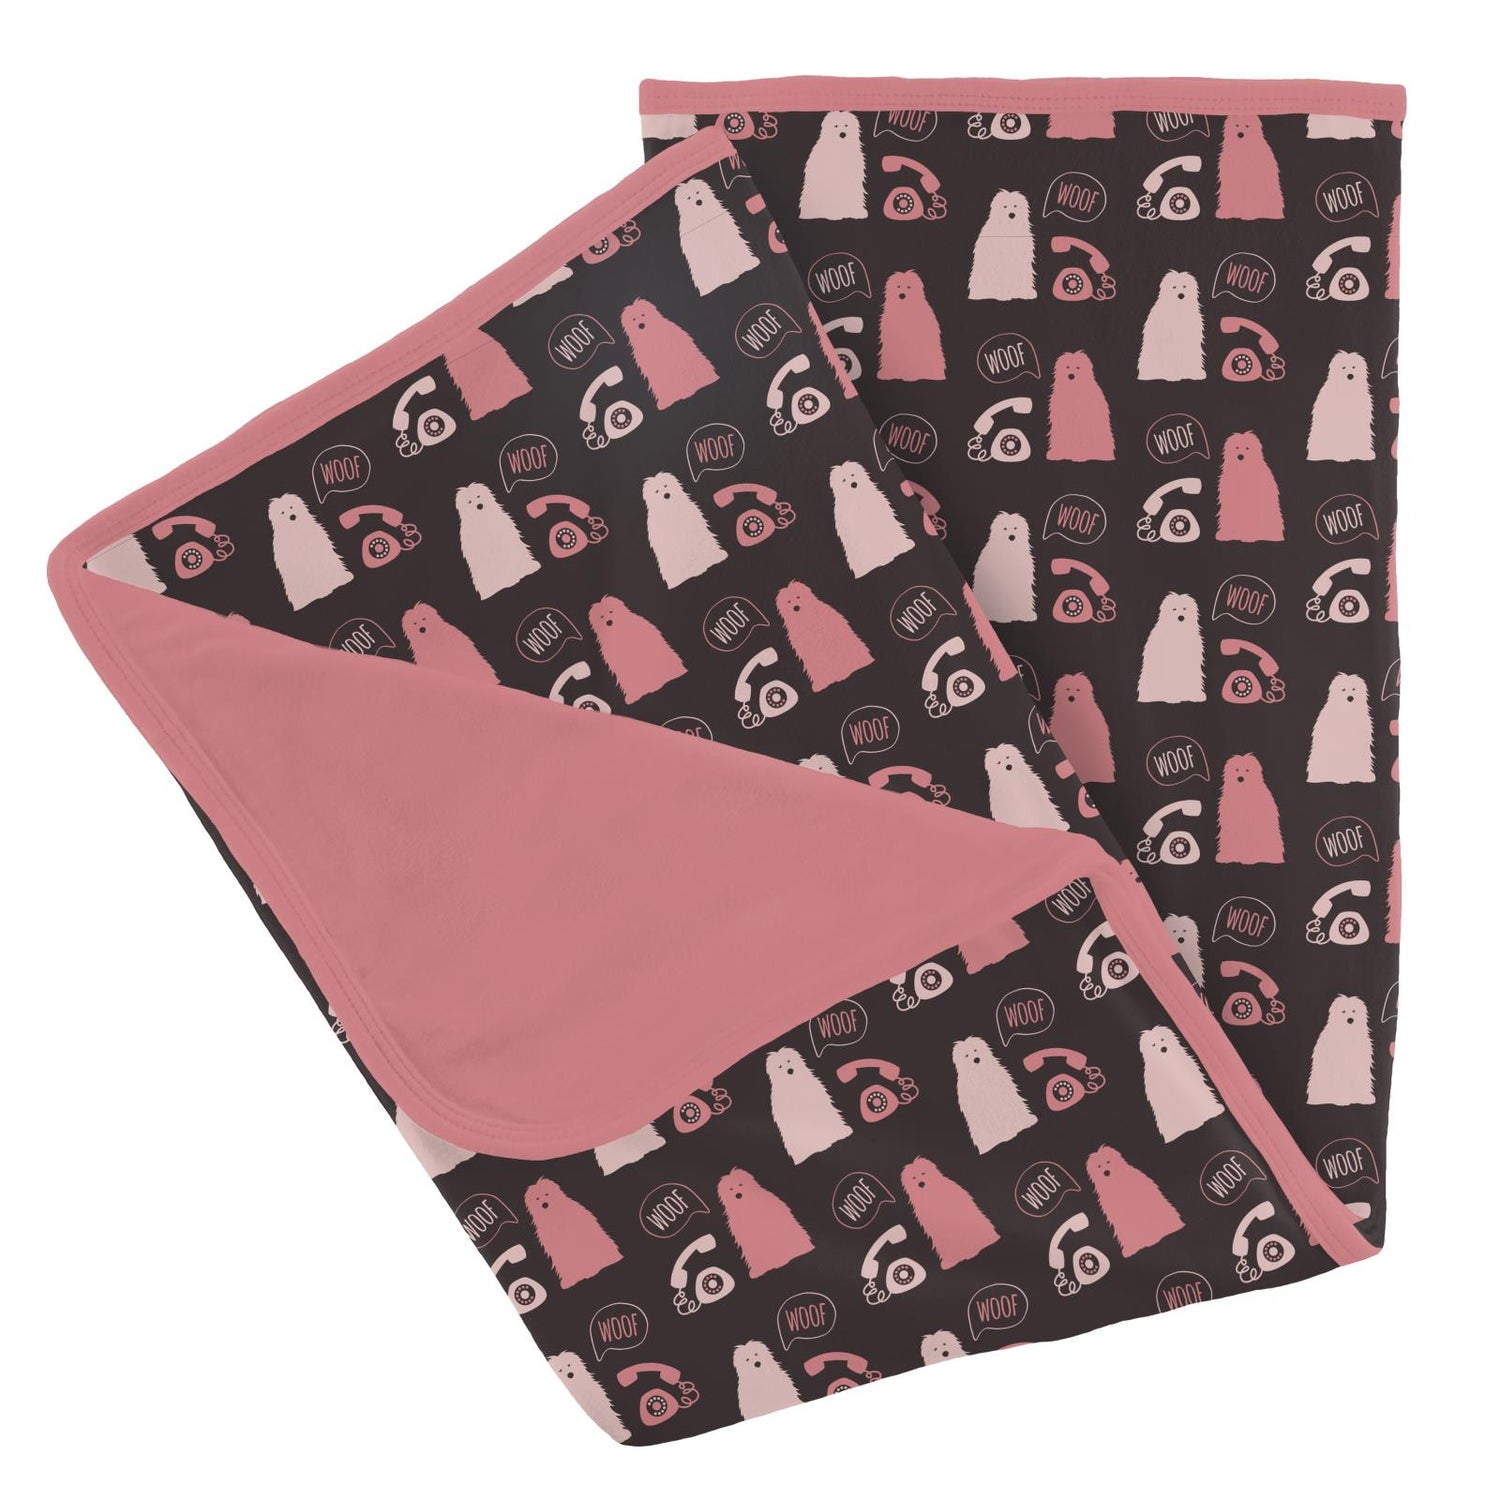 Print Stroller Blanket in Midnight Telephone and Dog